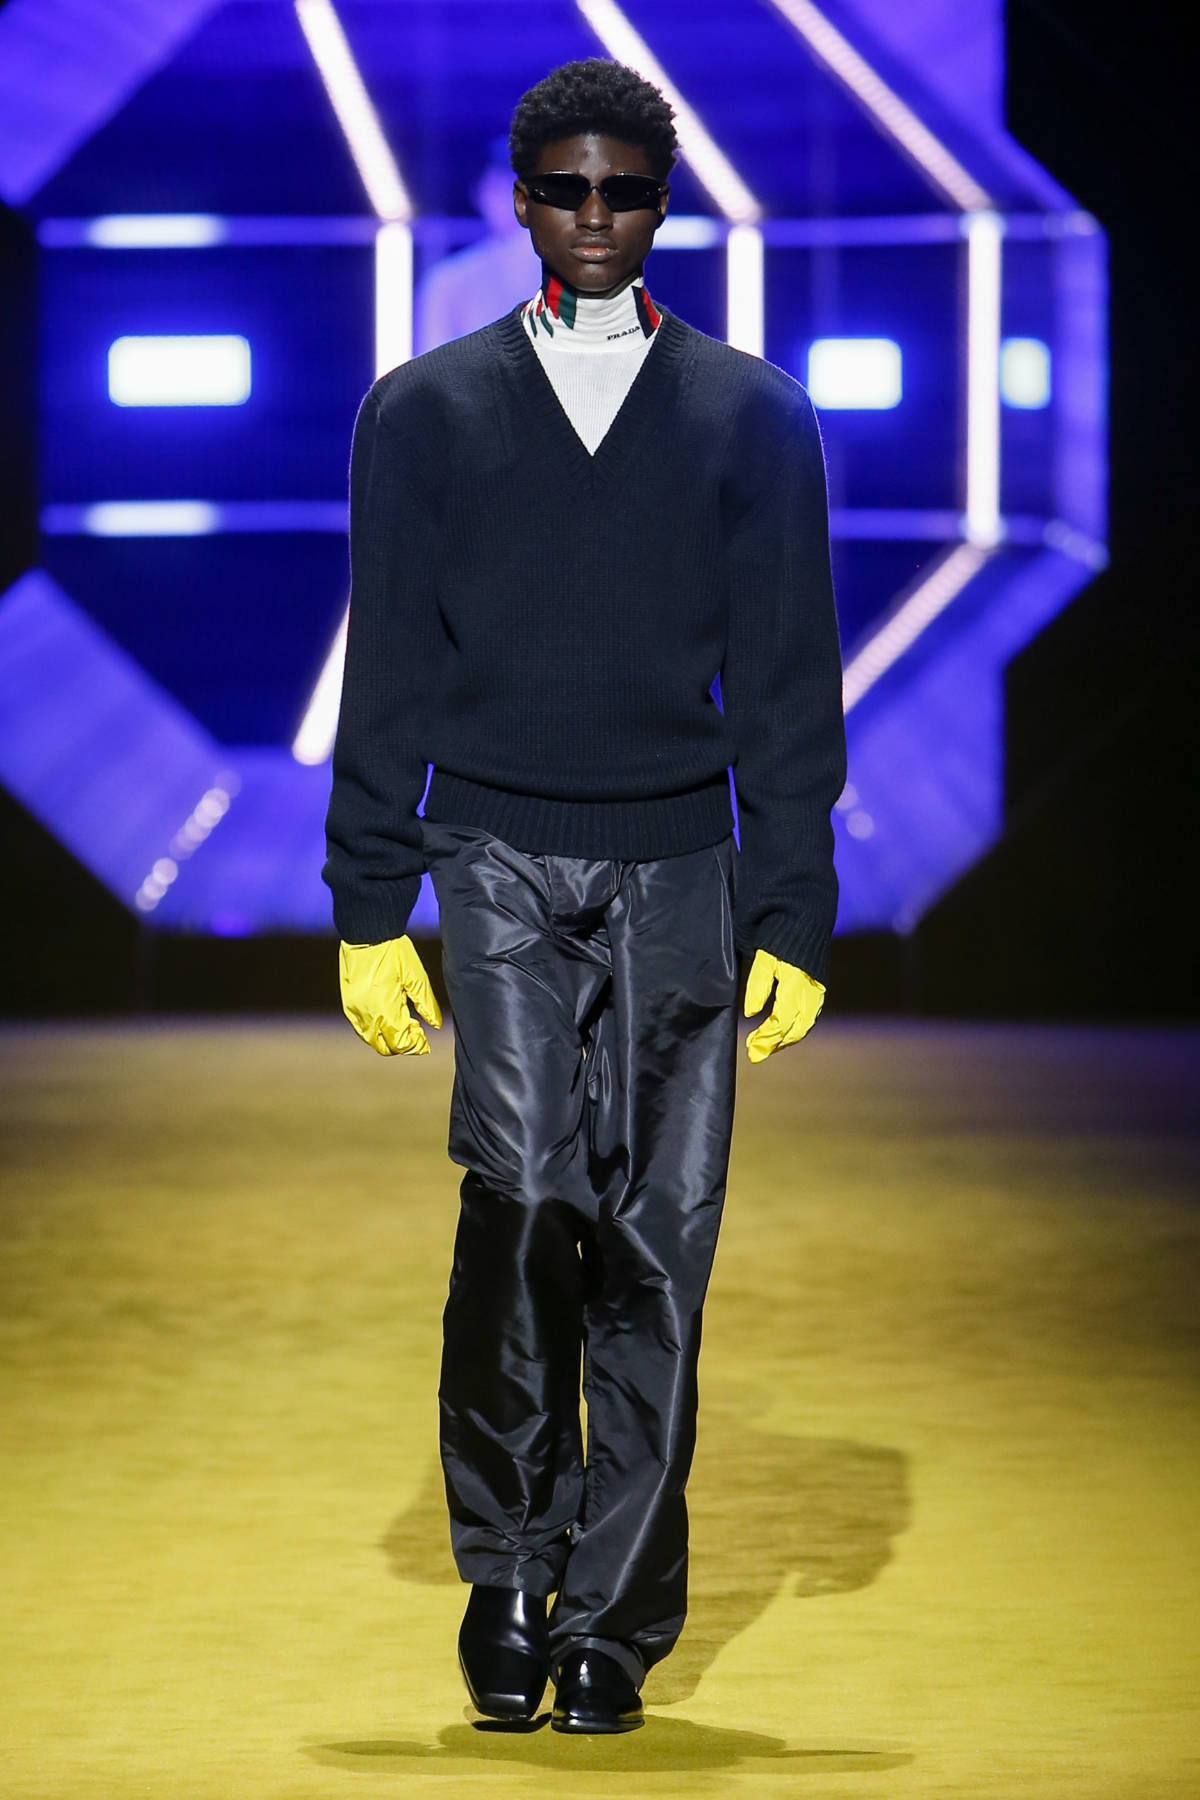 Prada Presents Its New Fall/Winter 2022 Menswear Collection: Body Of Work